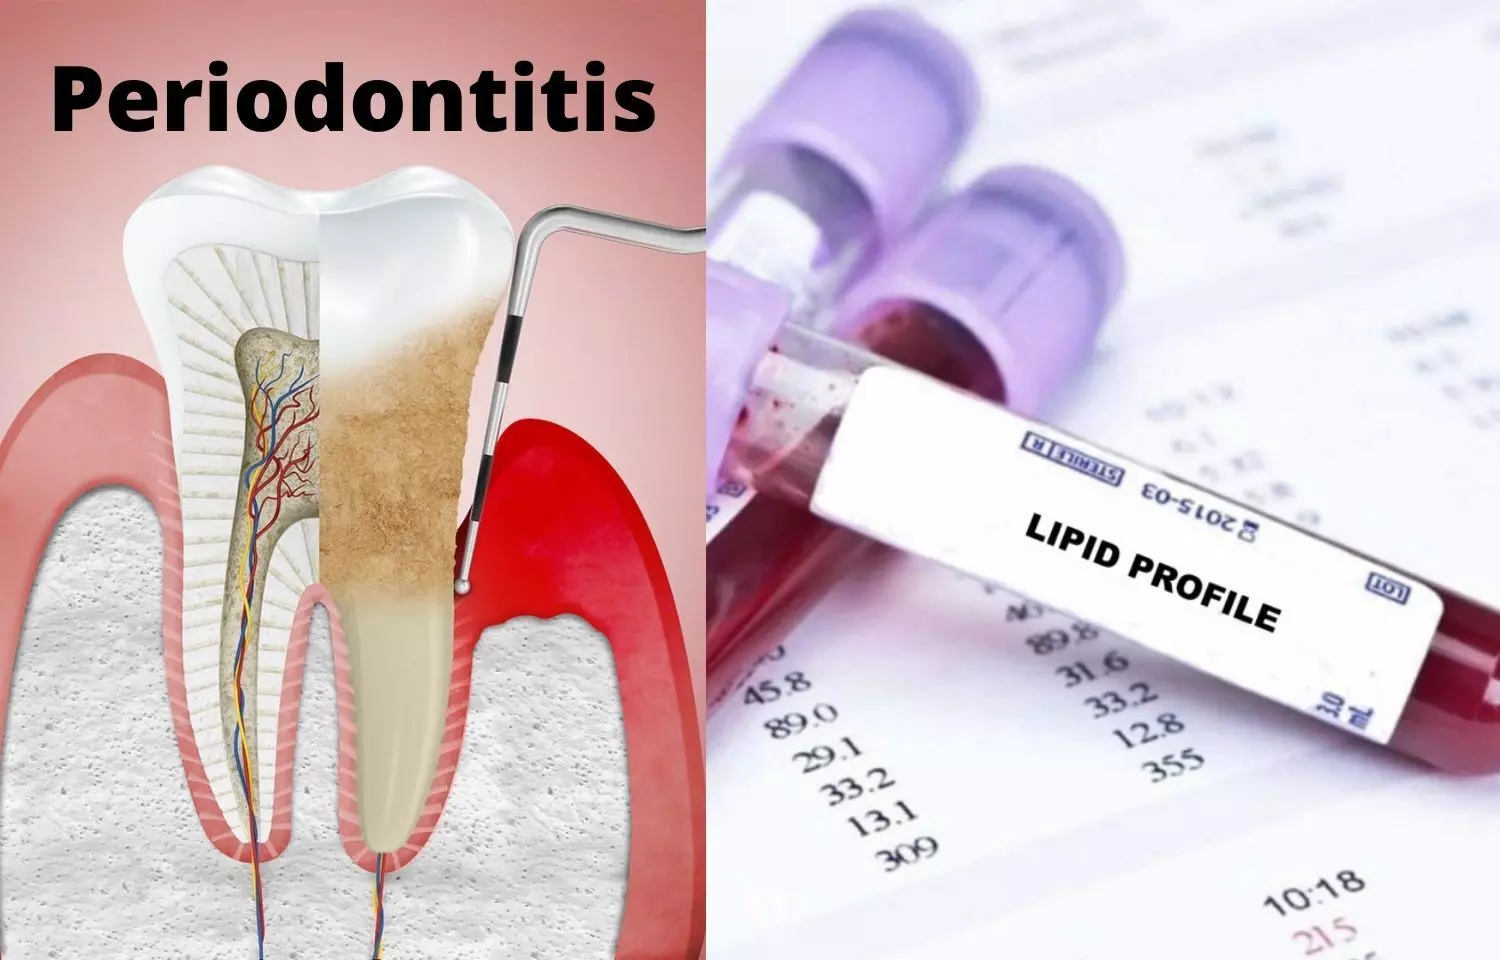 Diabetic Nephropathy patients with Chronic Periodontitis tied to Increased Dyslipidemia risk